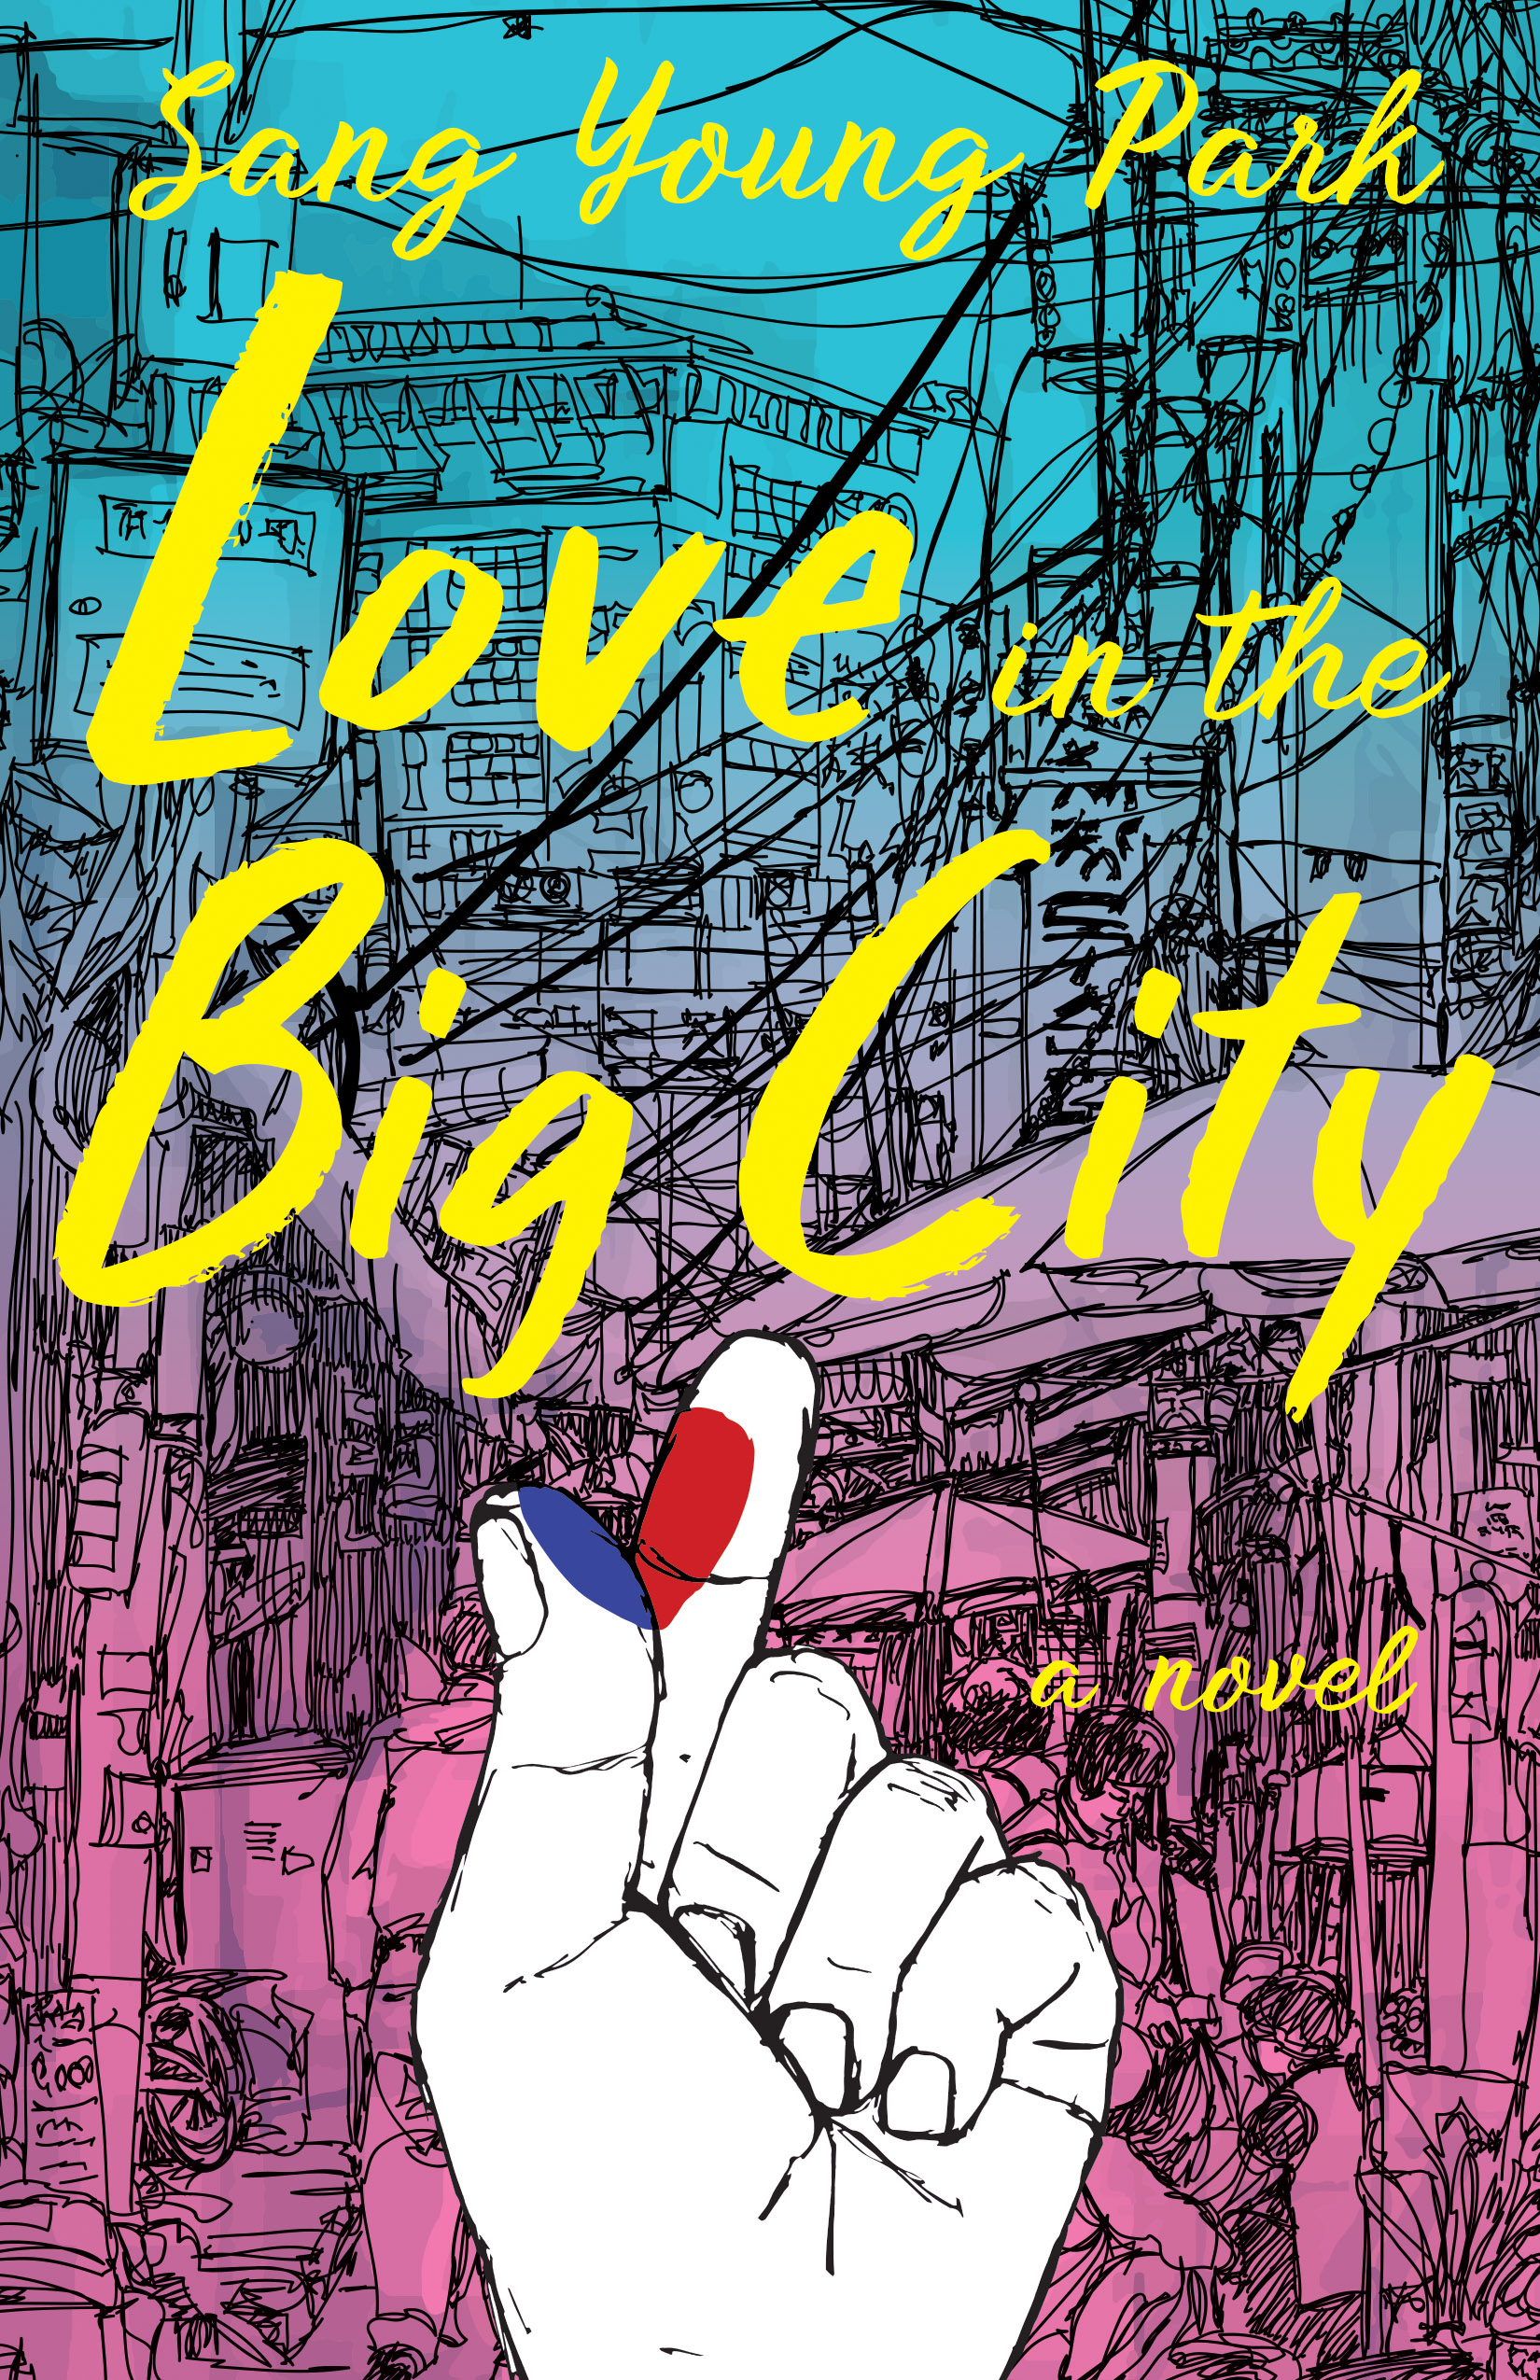 The ombre book cover of “Love in the Big City” changing from teal to bright pink, with its title in a bright yellow brush-stroke font. In the background, a line illustration of Seoul, and foregrounded, an illustrated white hand with blue on the thumb and red on the index figure. 